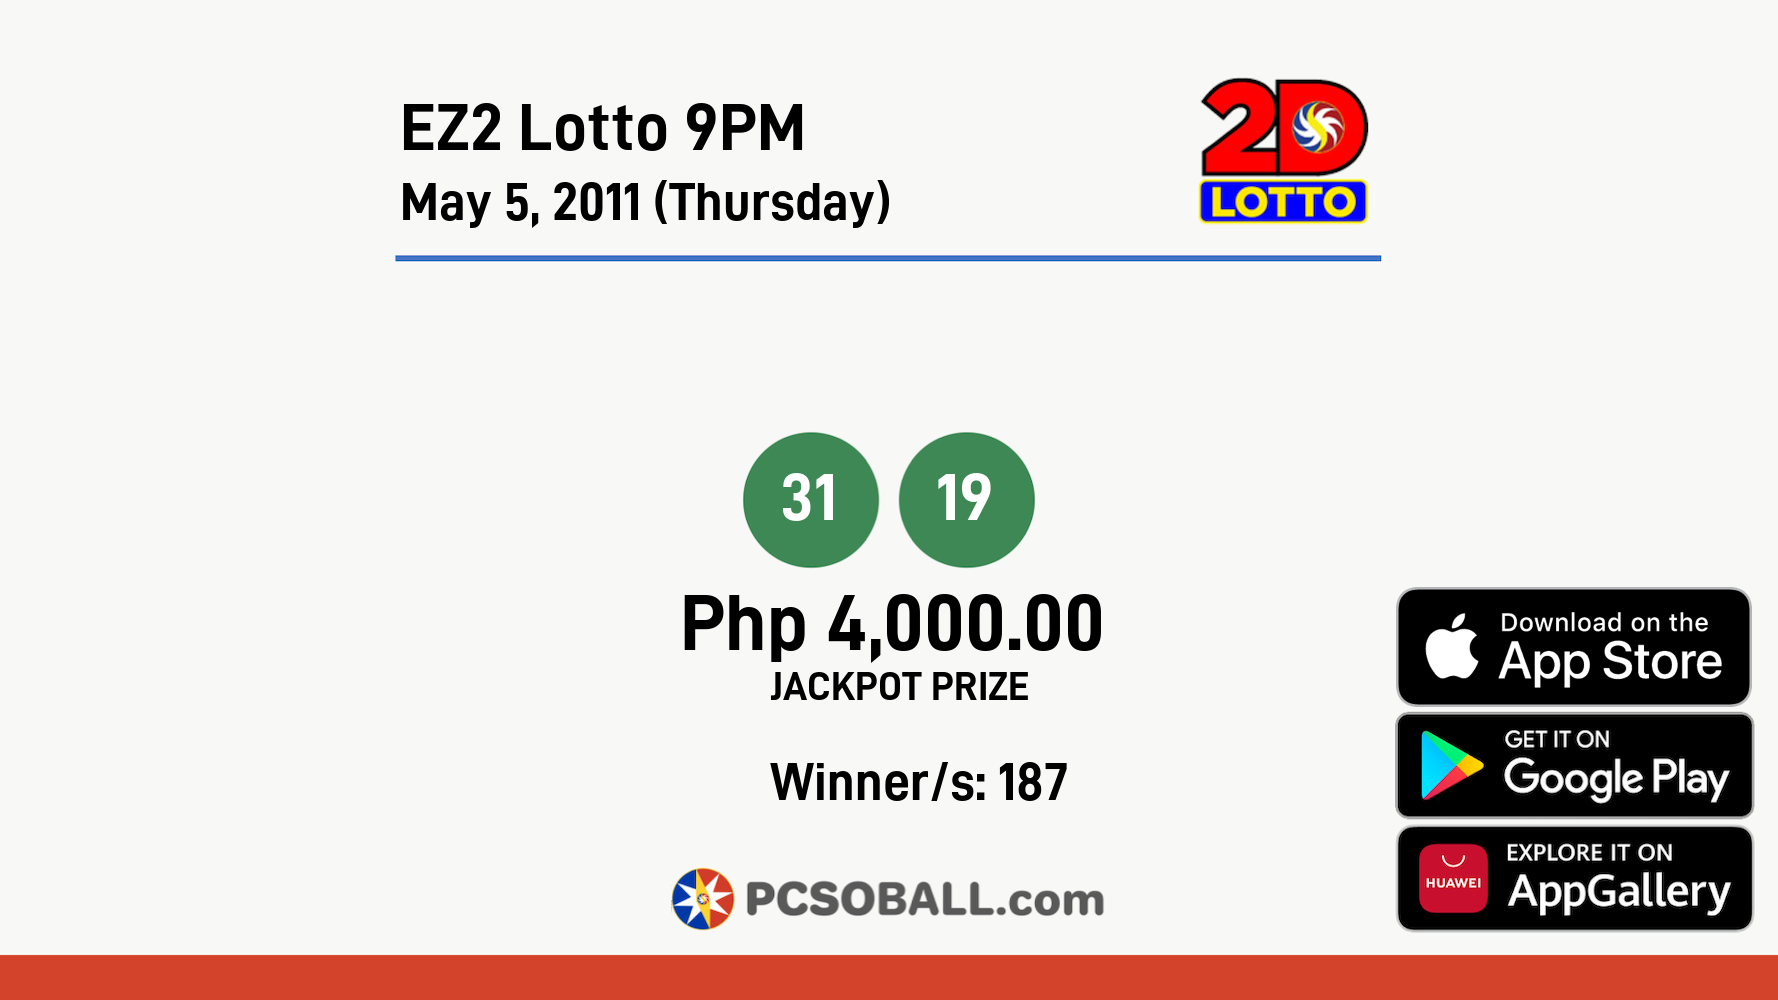 EZ2 Lotto 9PM May 5, 2011 (Thursday) Result